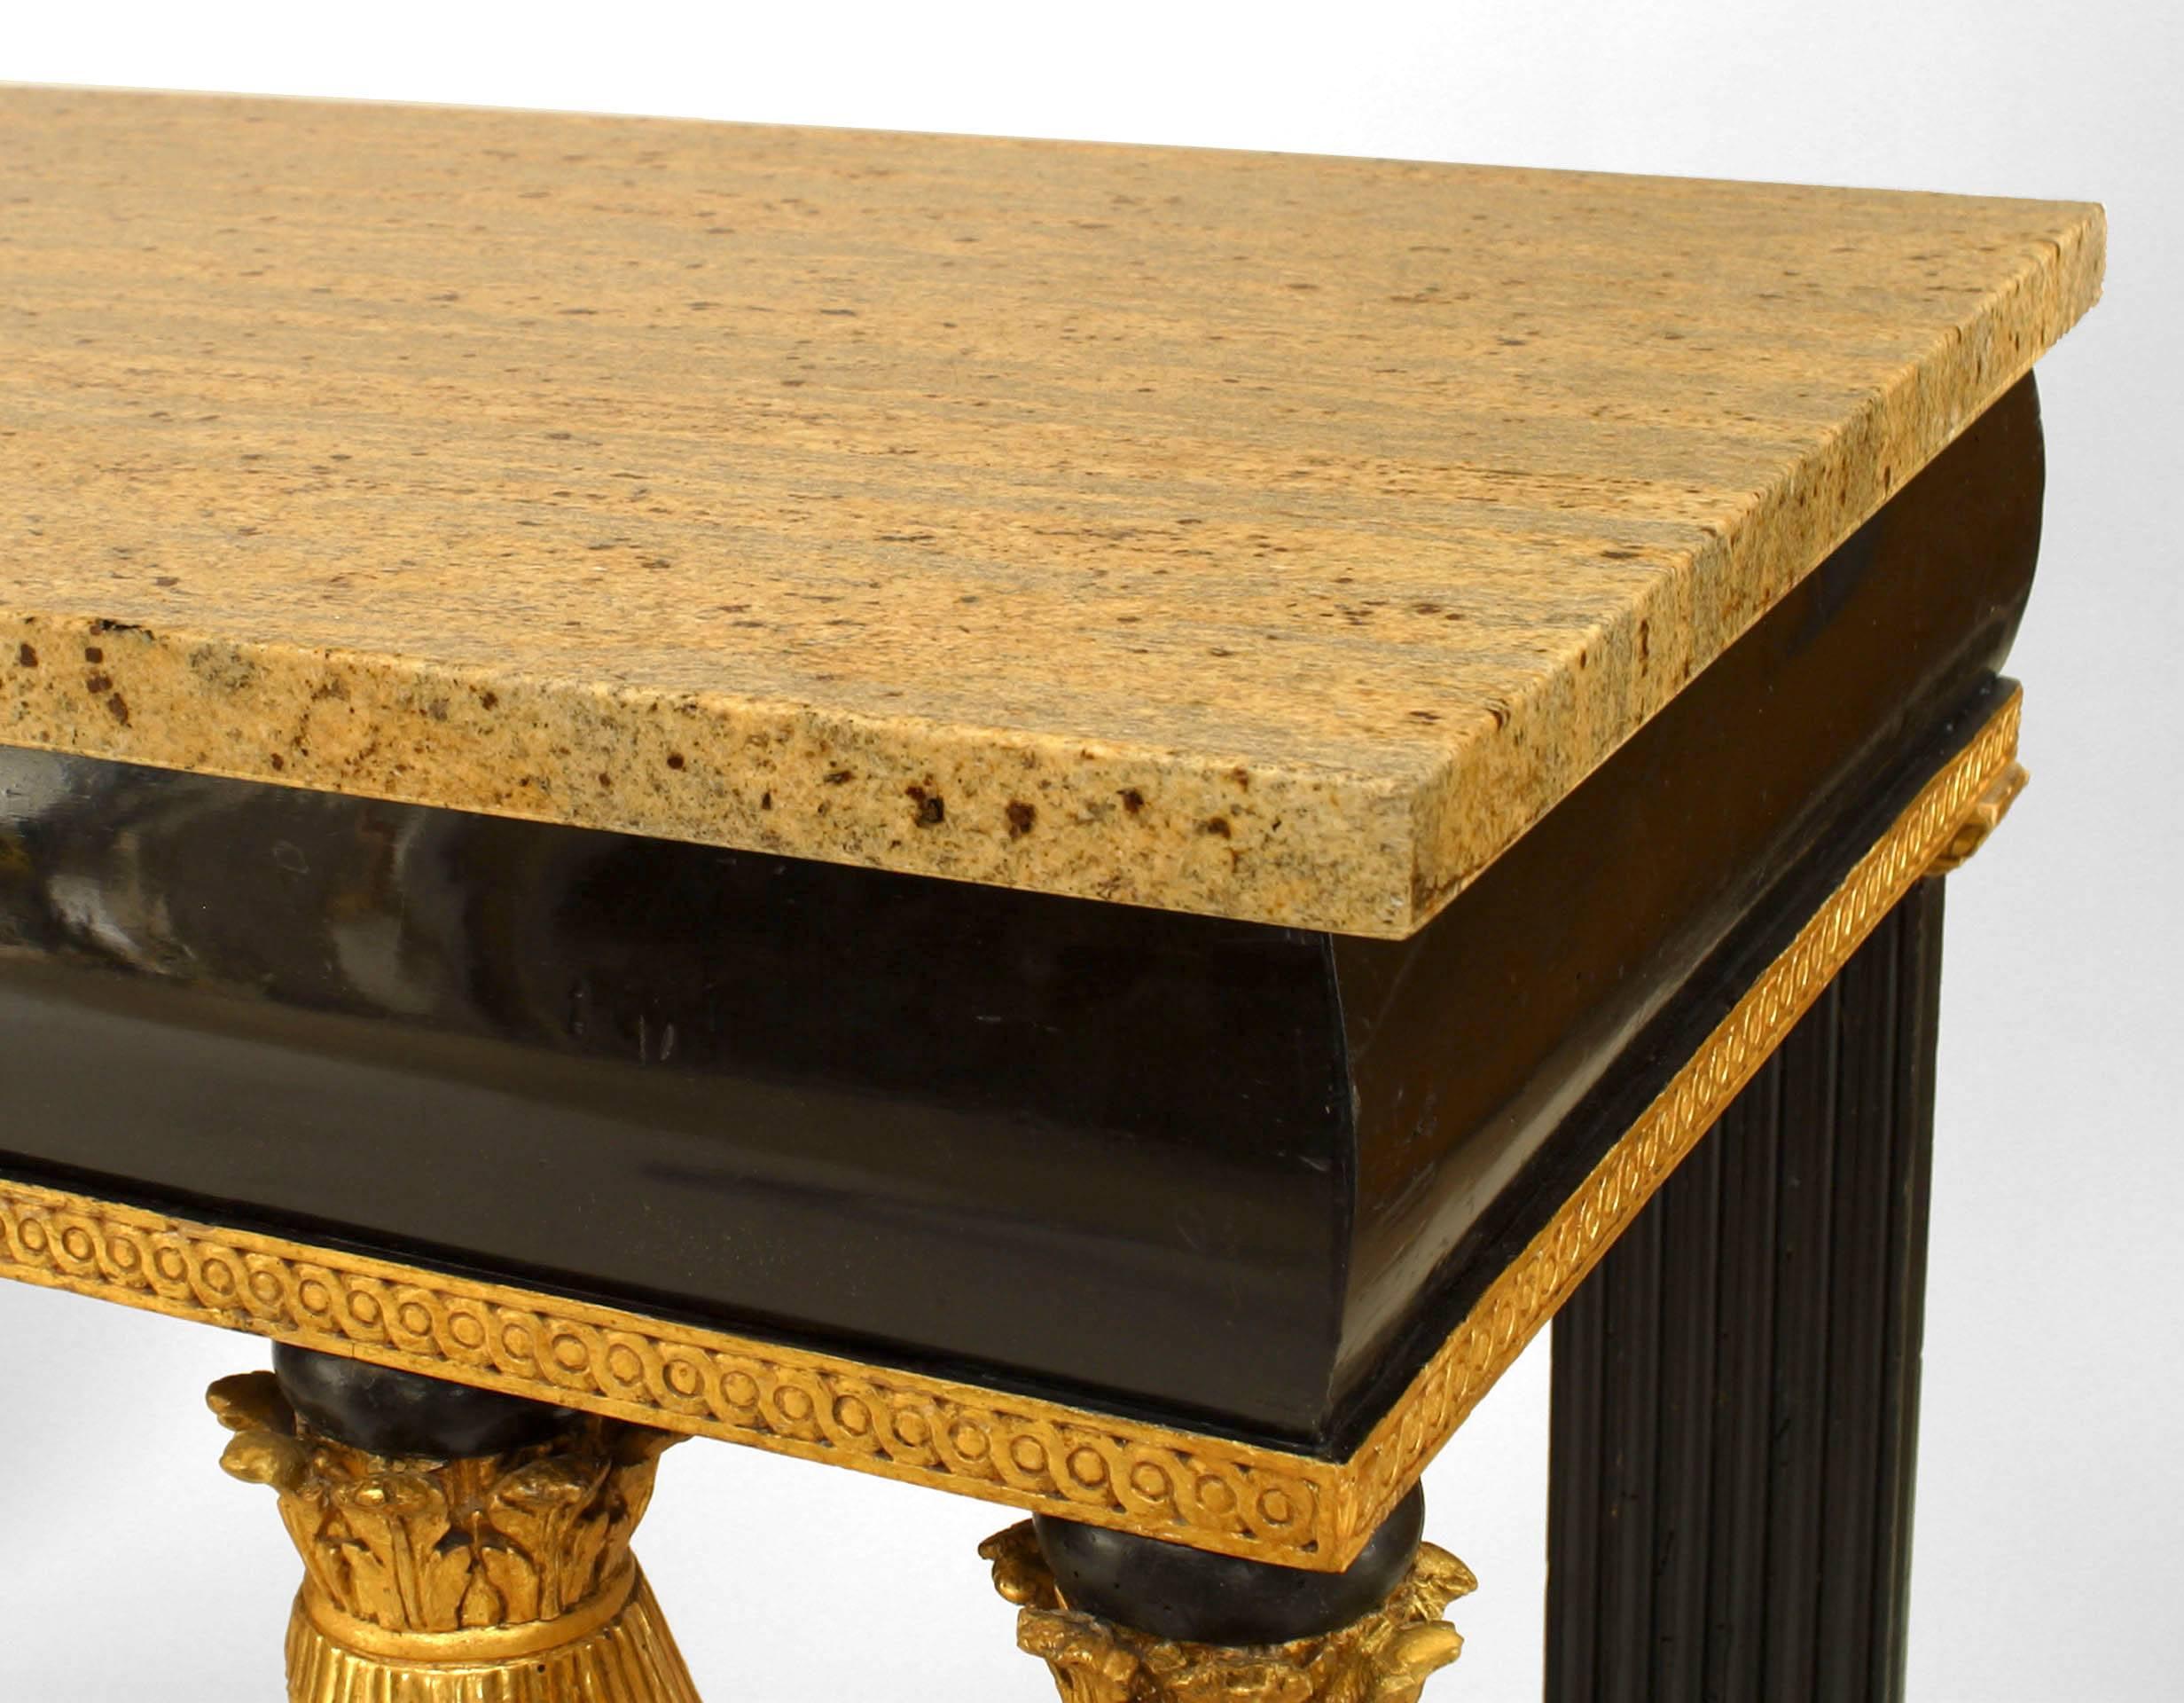 Neoclassical 19th c. Austrian Neoclassic Gilt and Marble Console